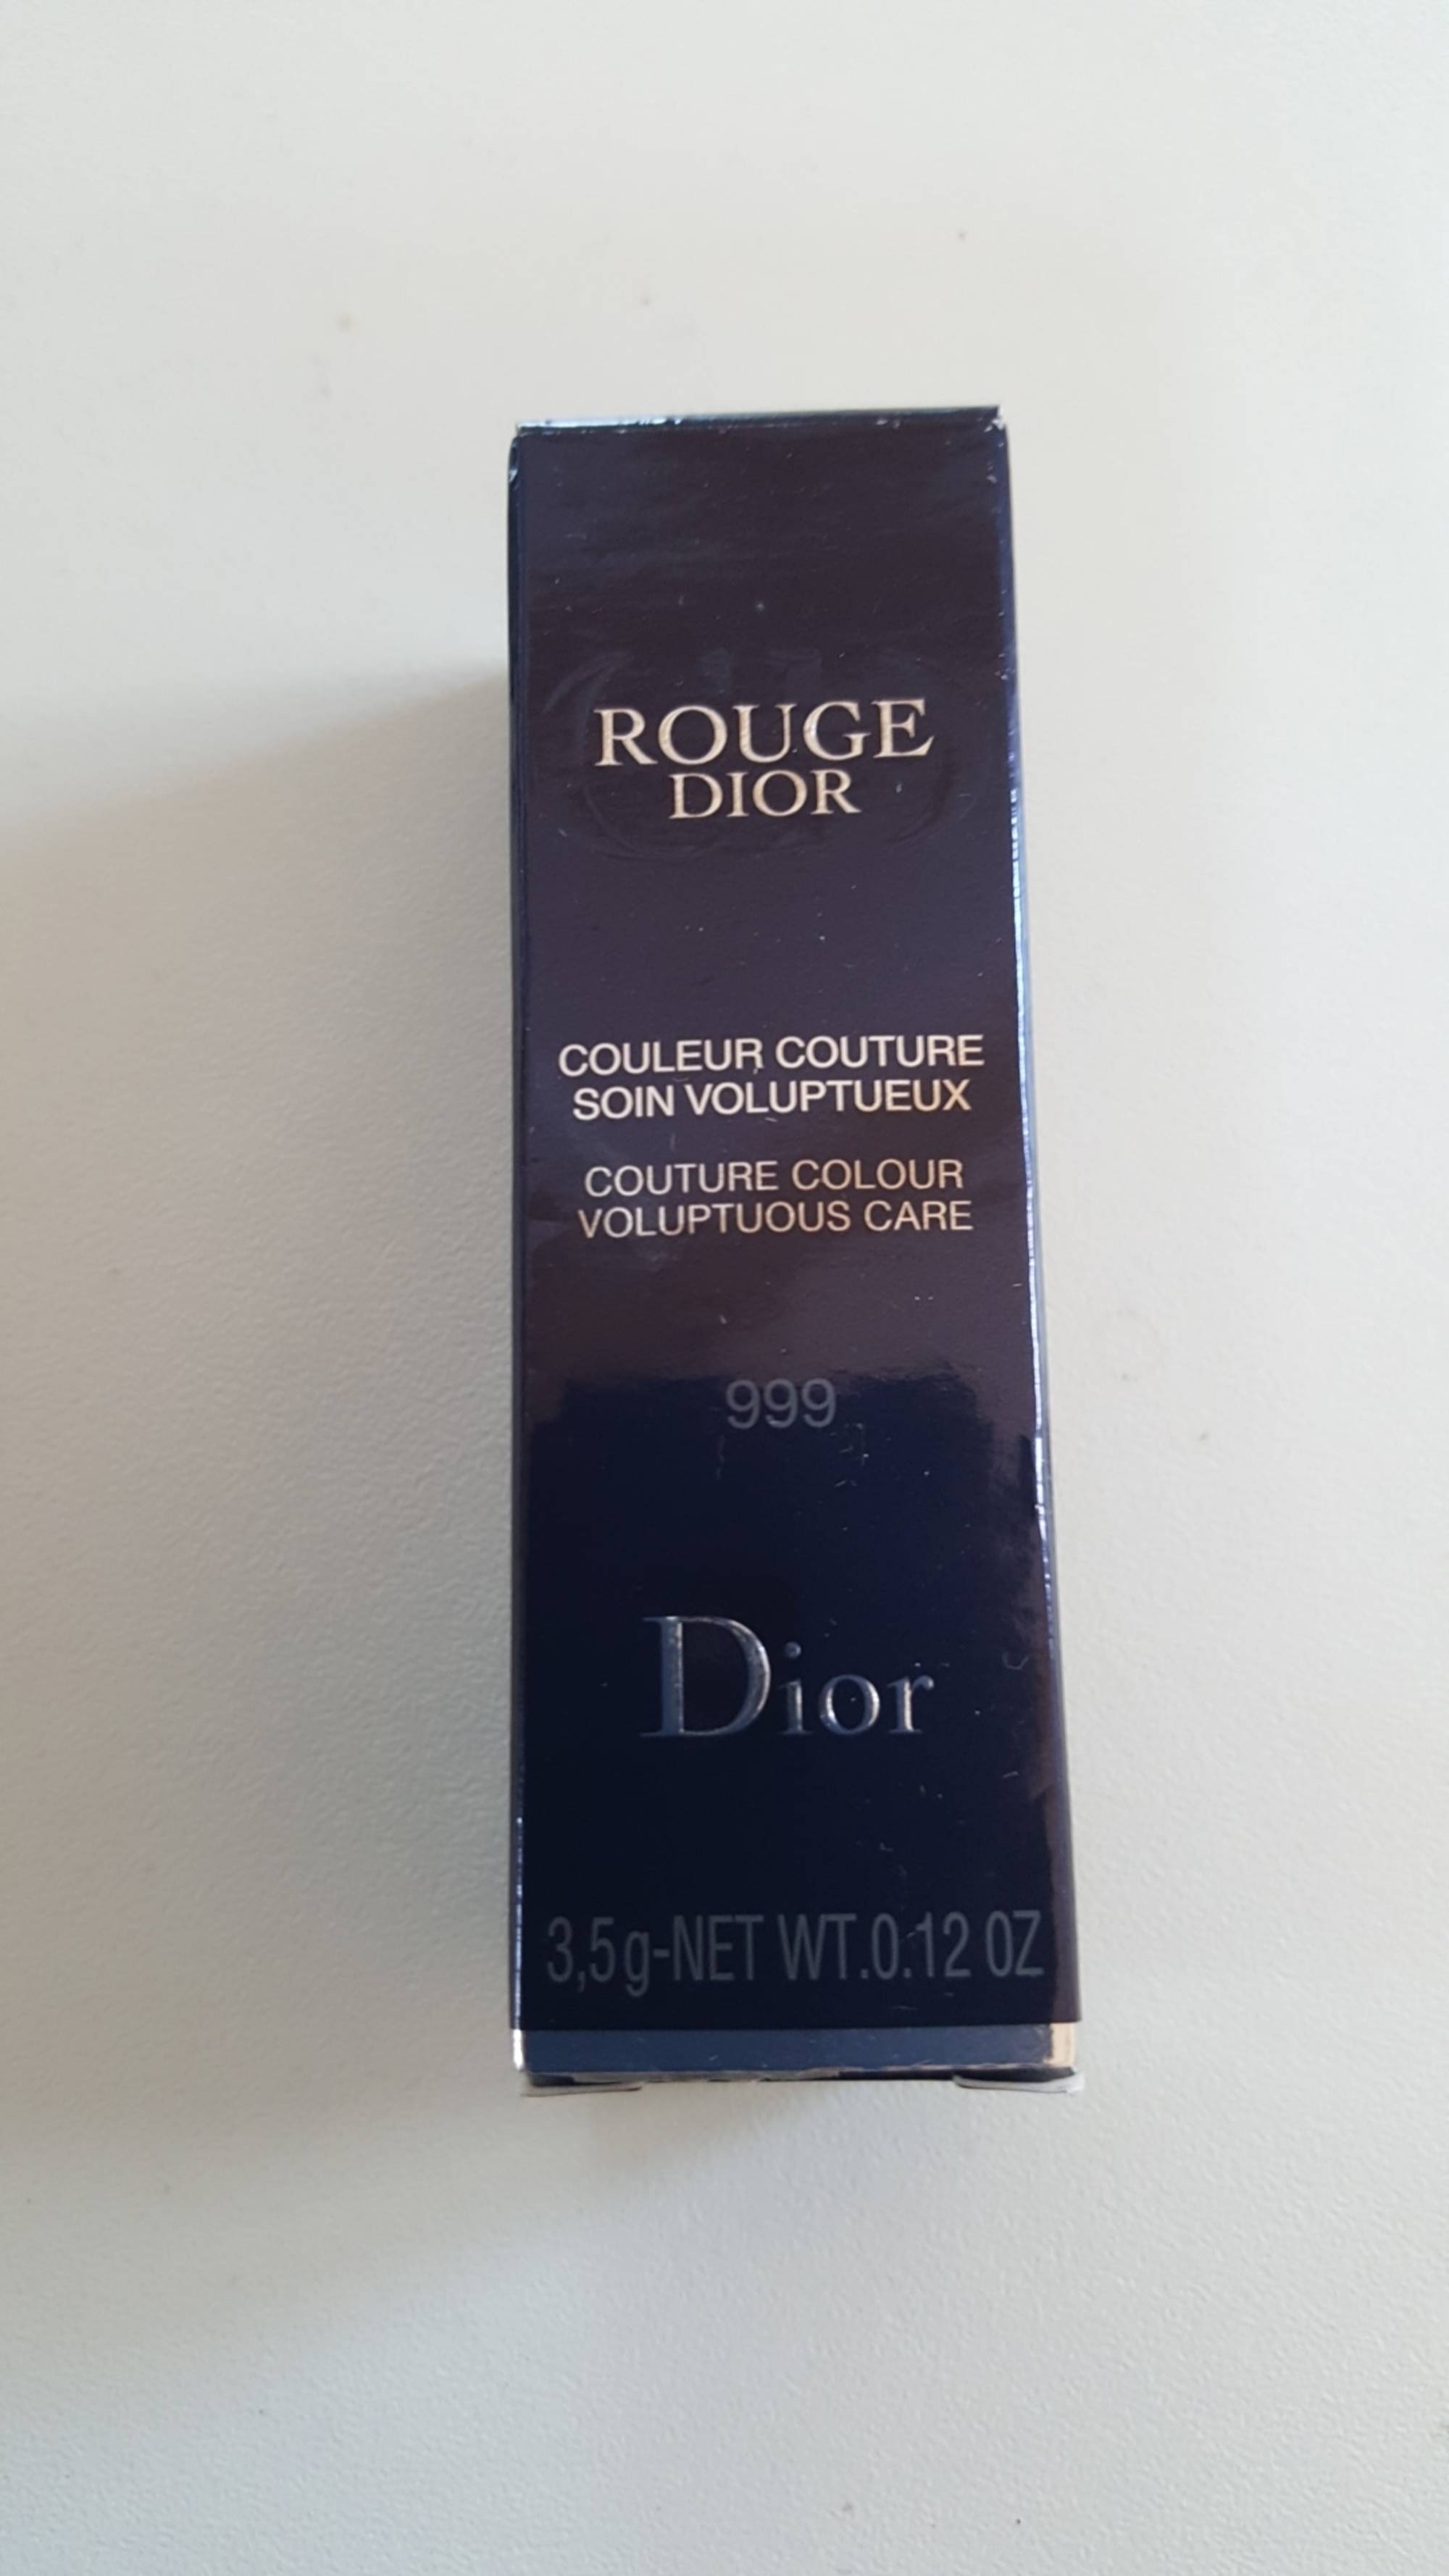 DIOR - Rouge dior - Couleur couture soin voluptueux 999